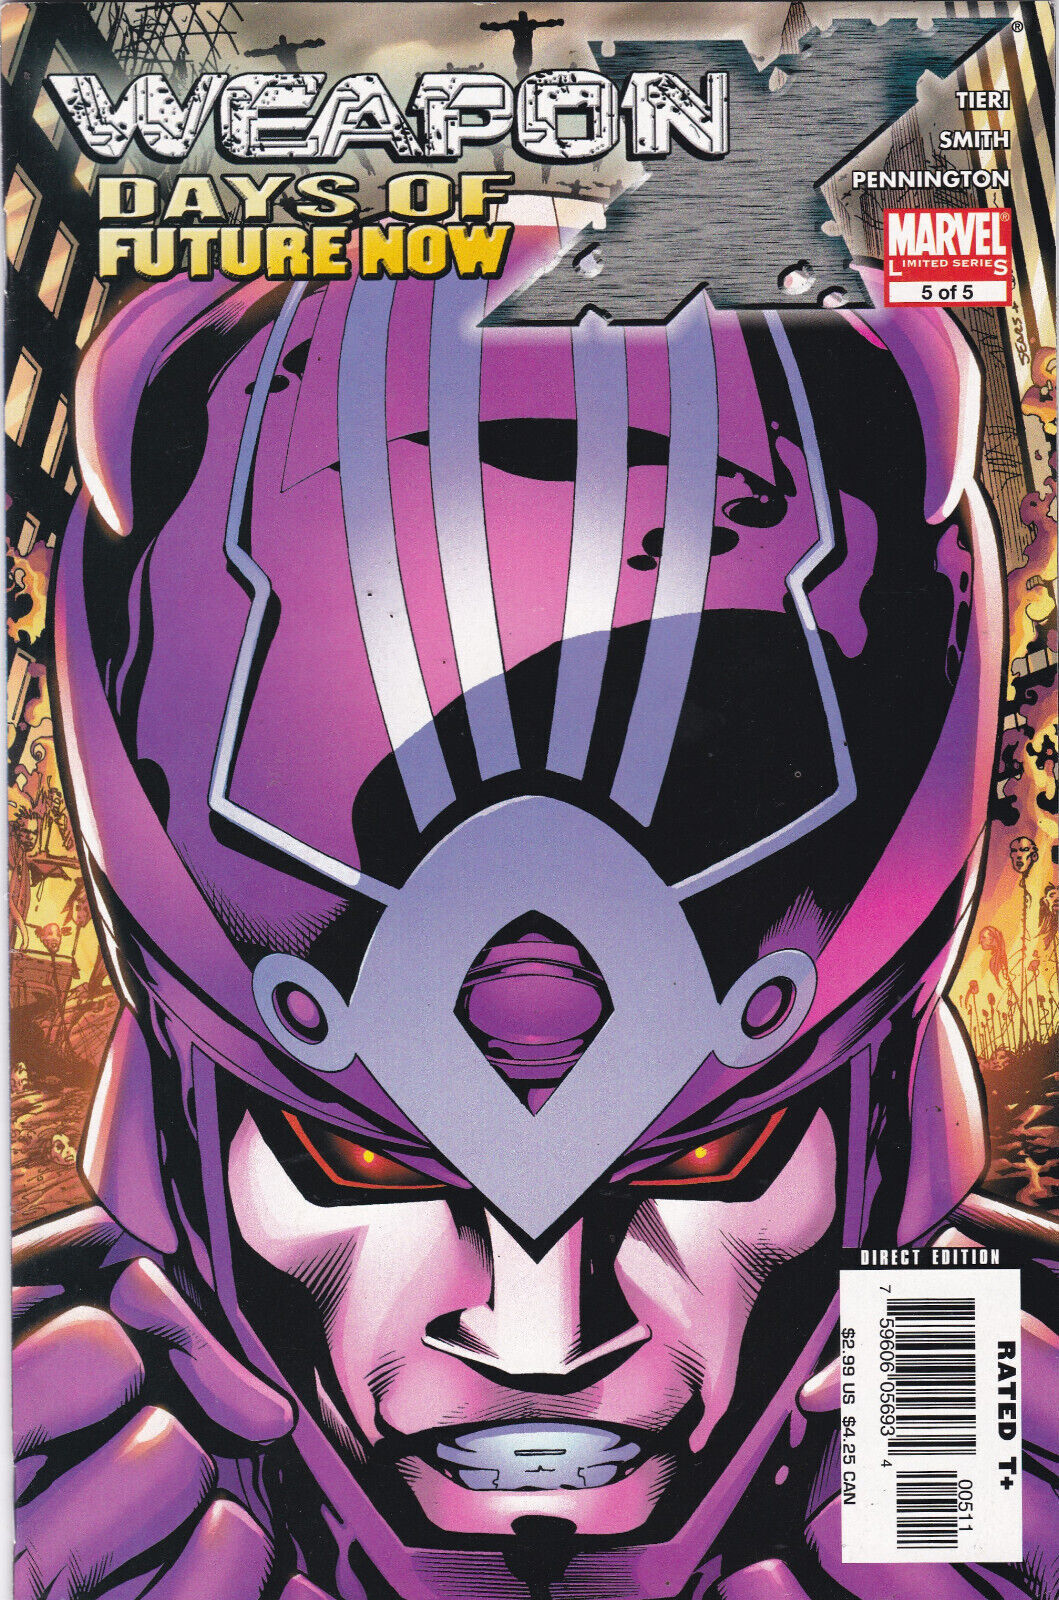 Weapon X: Days of Future Now #5, (2005-2006) Marvel Comics